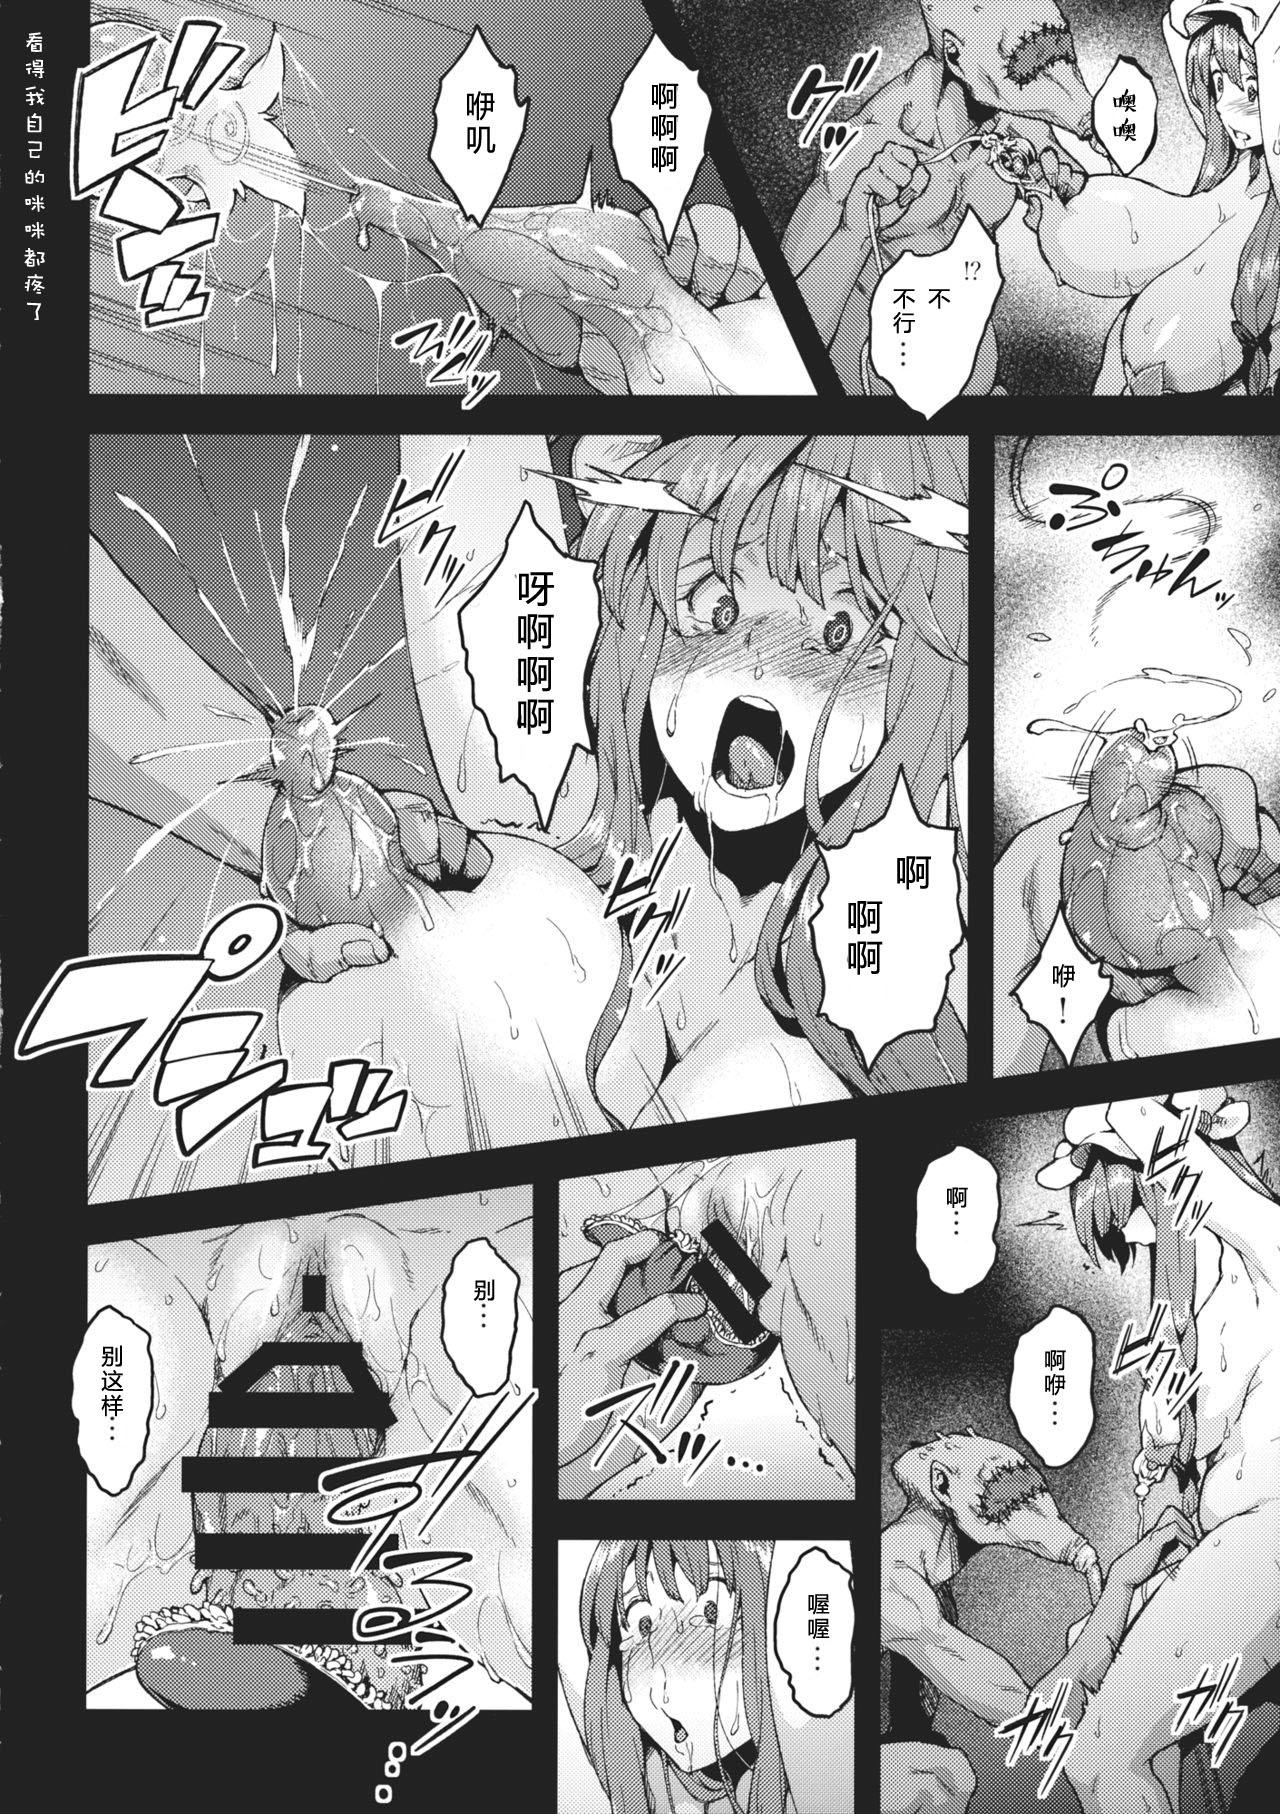 Sislovesme Pache Otoshi after II - Touhou project Finger - Page 7